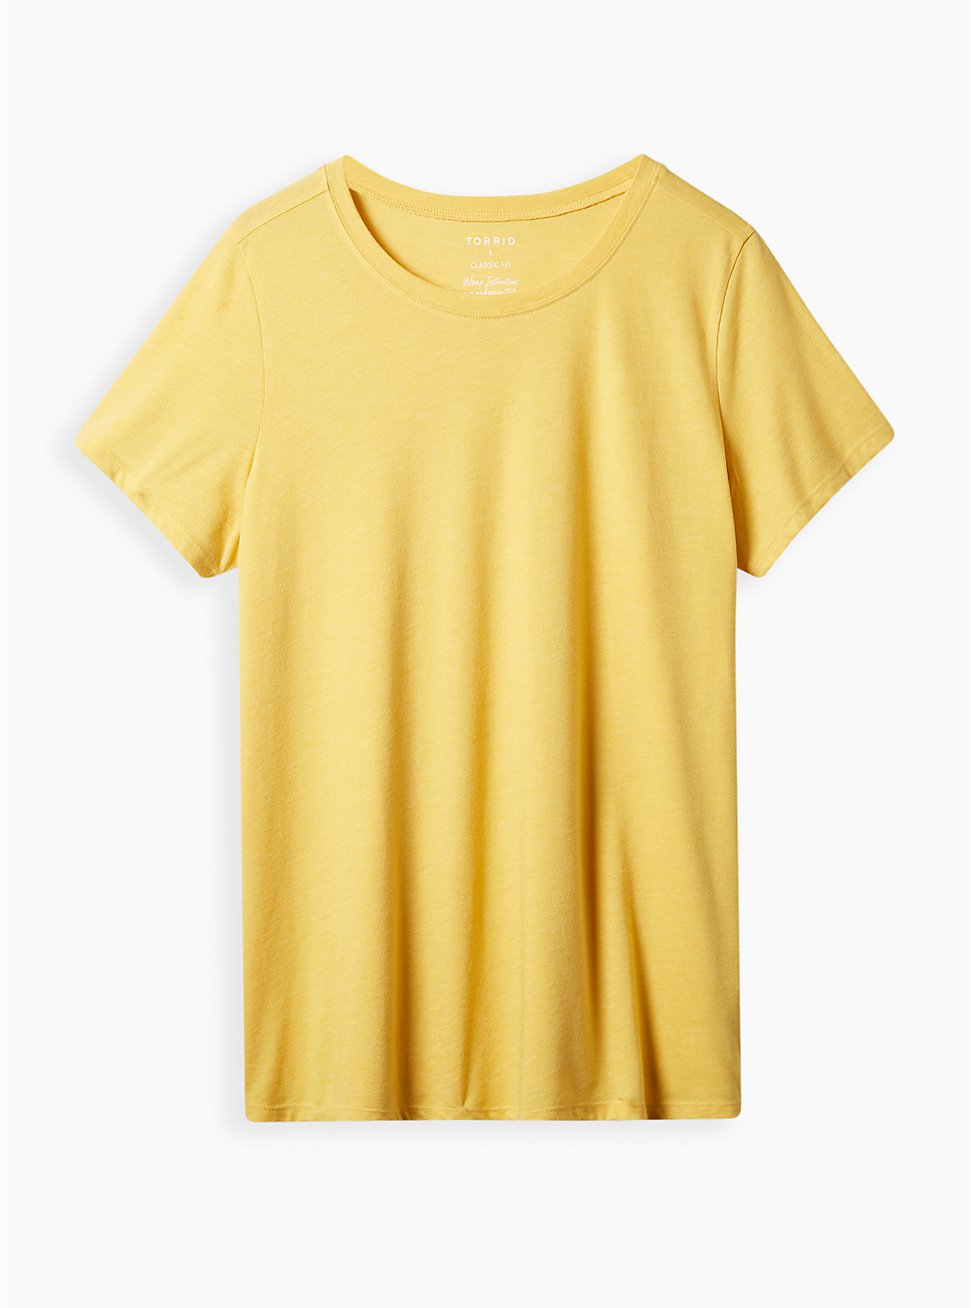 Plus Size  Everyday Tee - Signature Jersey Heather Yellow, YELLOW, hi-res